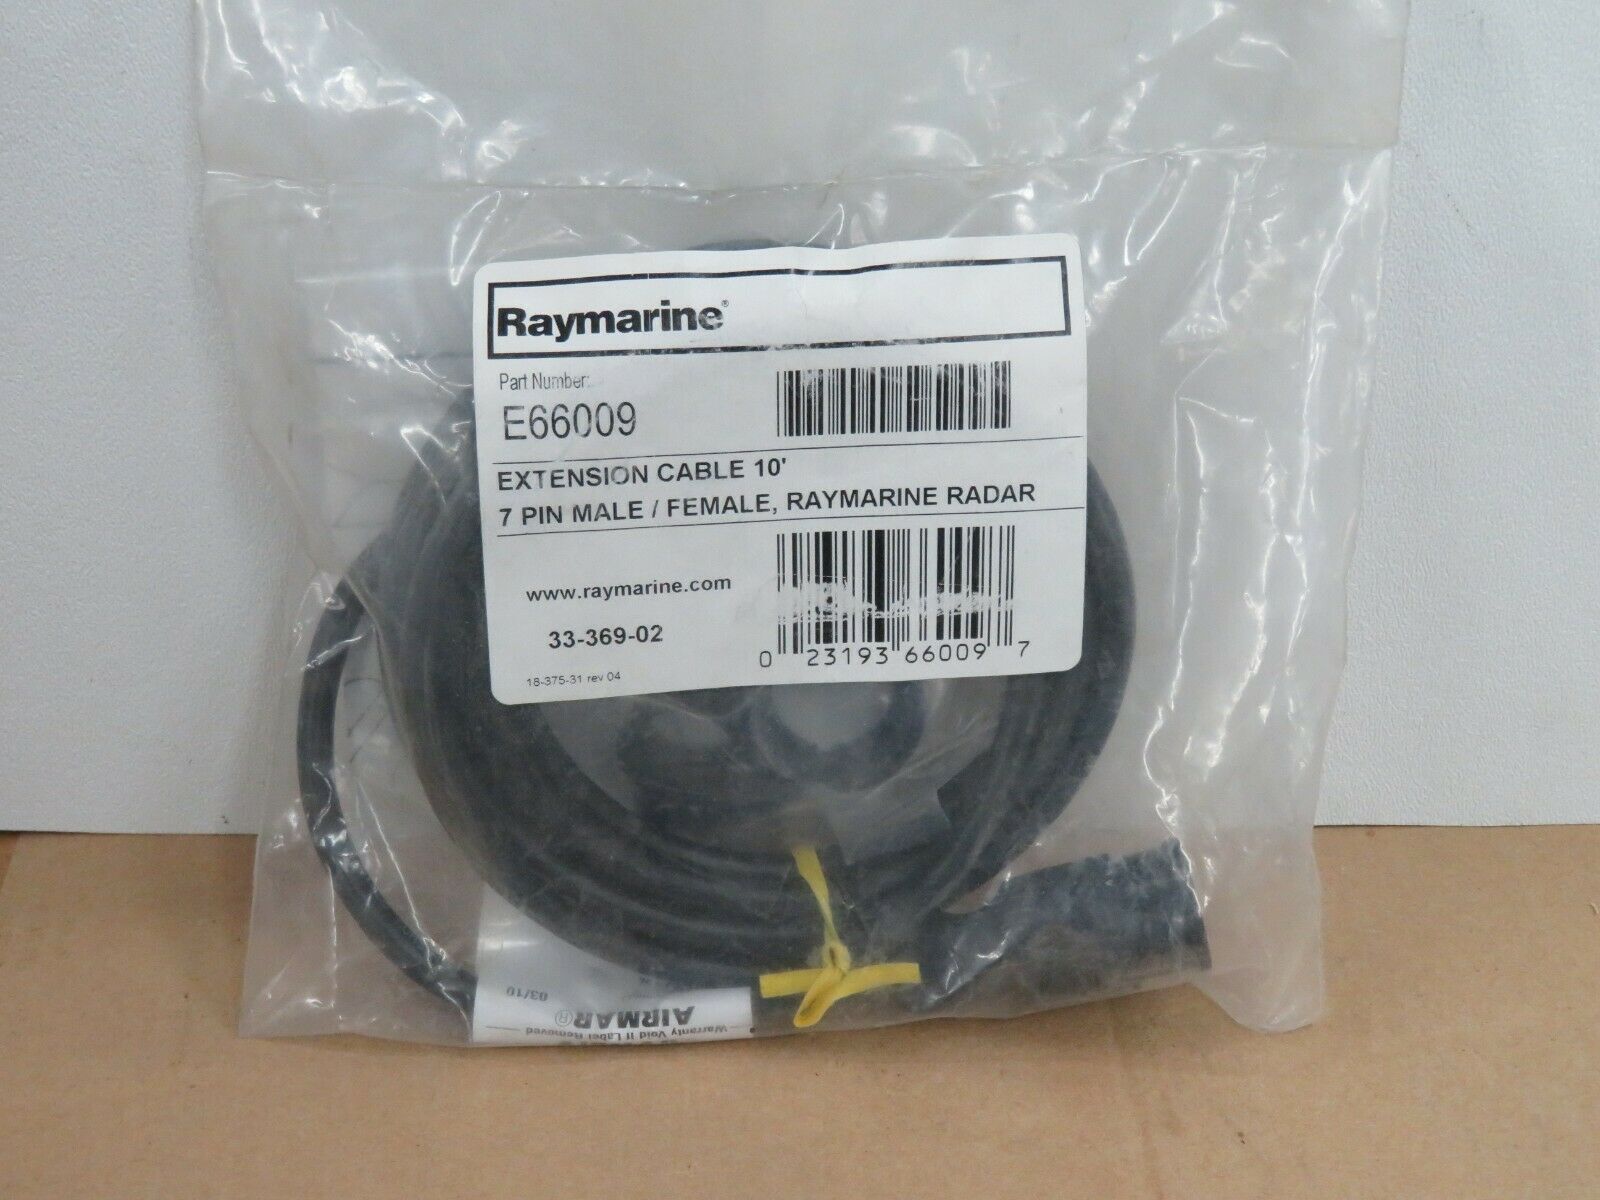 New Raymarine Dsm Transducer Extension Cable 3m 7-pin E66009